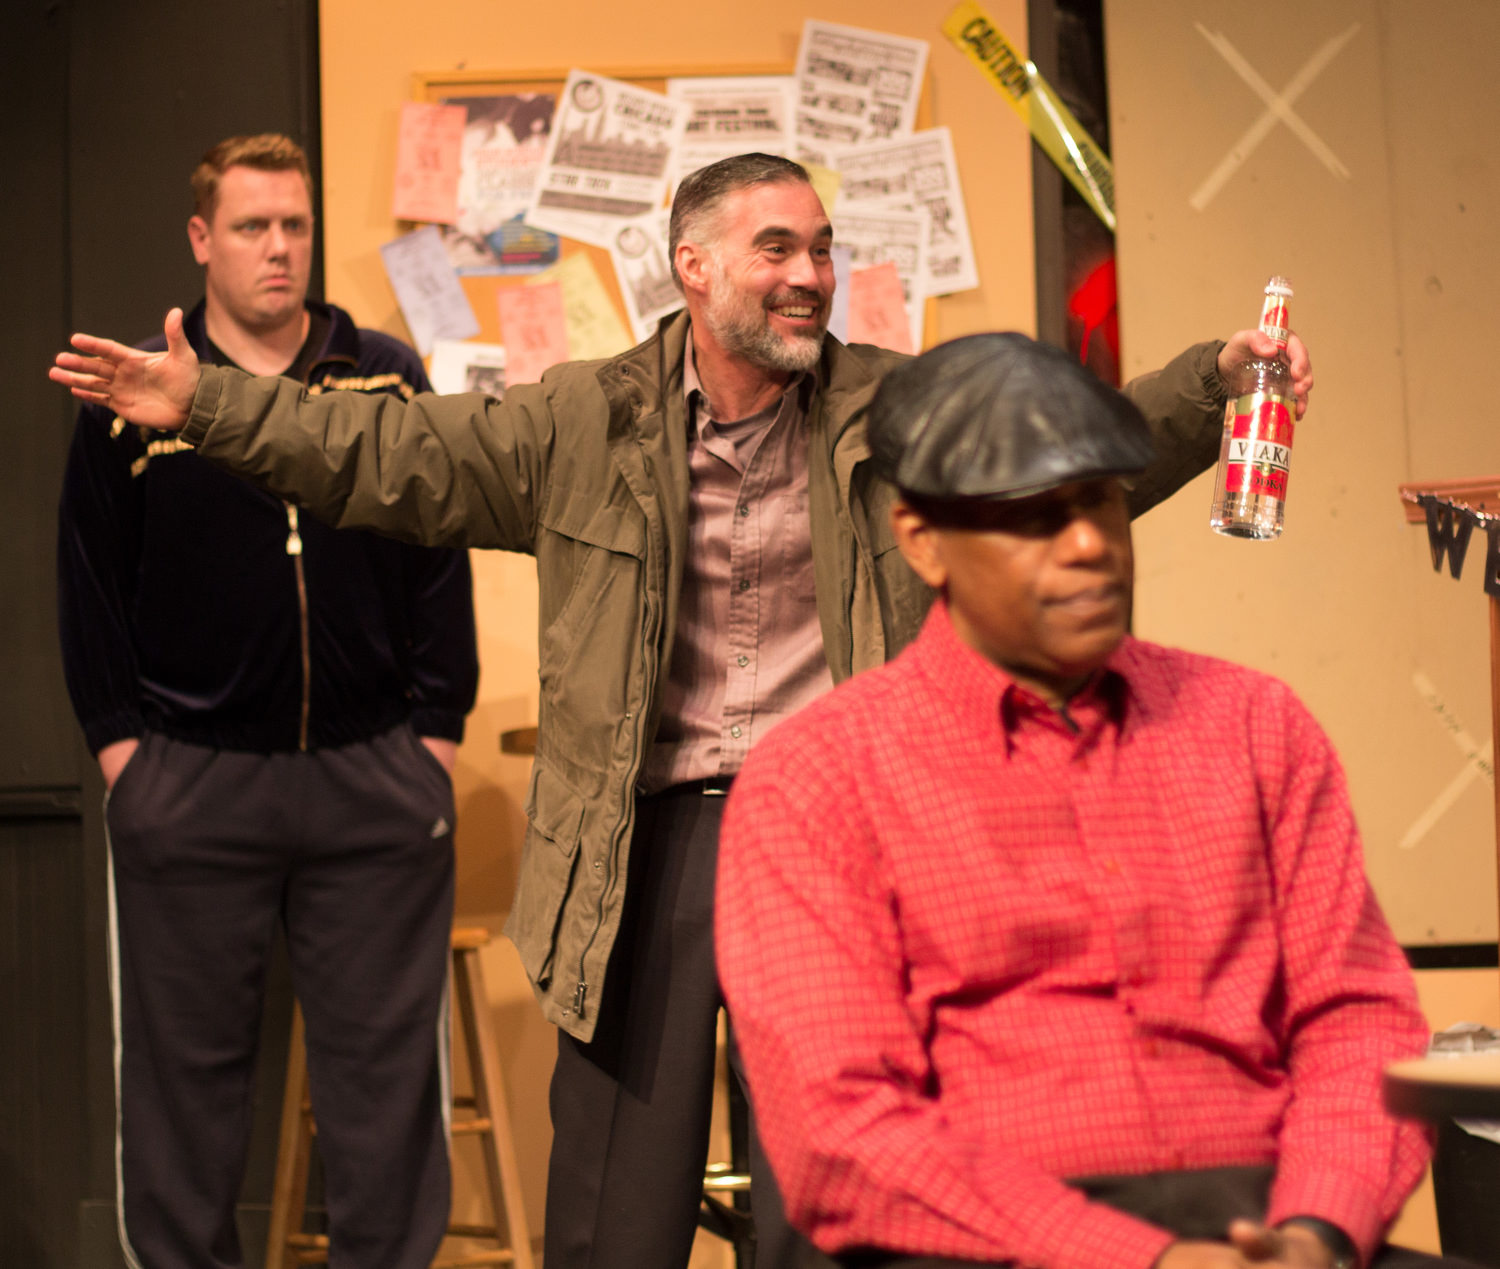 Dan Heinz (Kiril), Addison Parker (Max), and Dennis Jackson (Officer James Bailey) in SUPERIOR DONUTS at Olathe Civic Theatre Assocation. Photo by Shelly Stewart Banks.